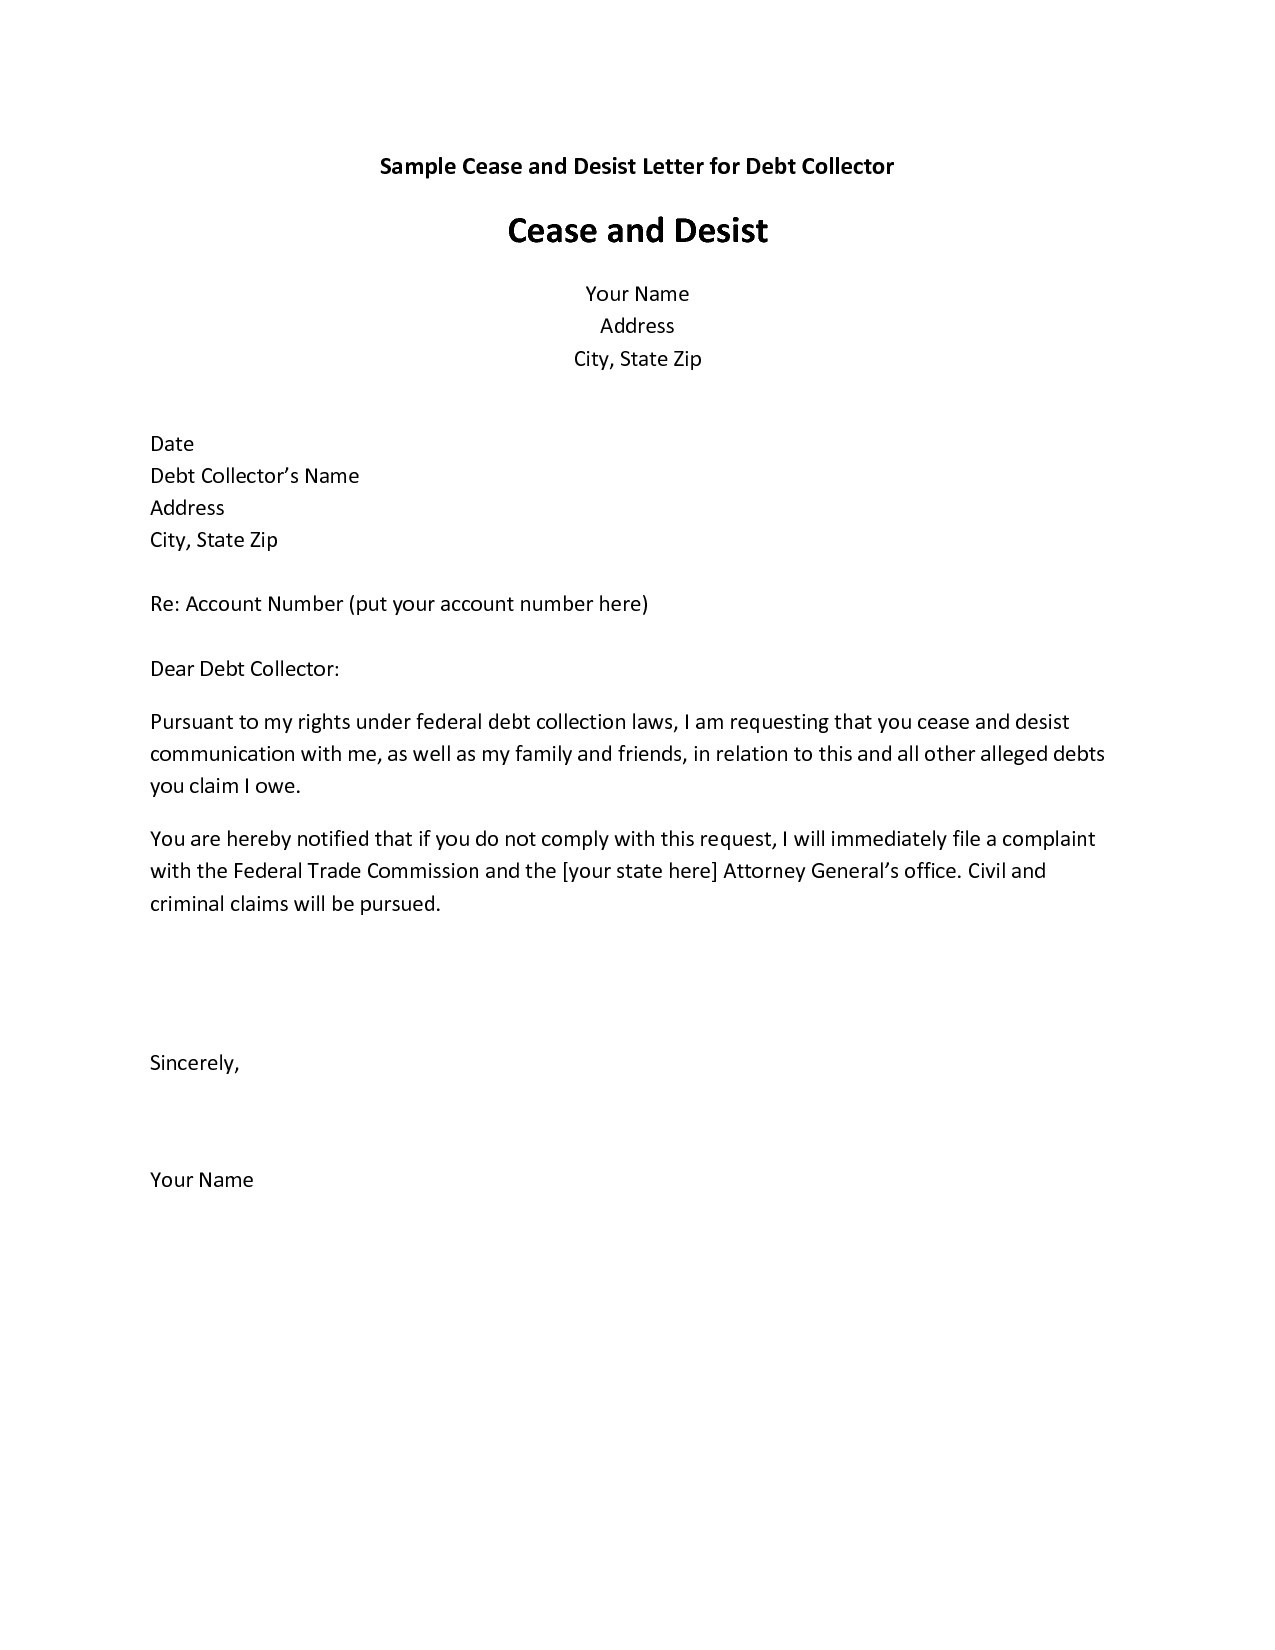 letter-of-intent-template-business-partnership-collection-letter